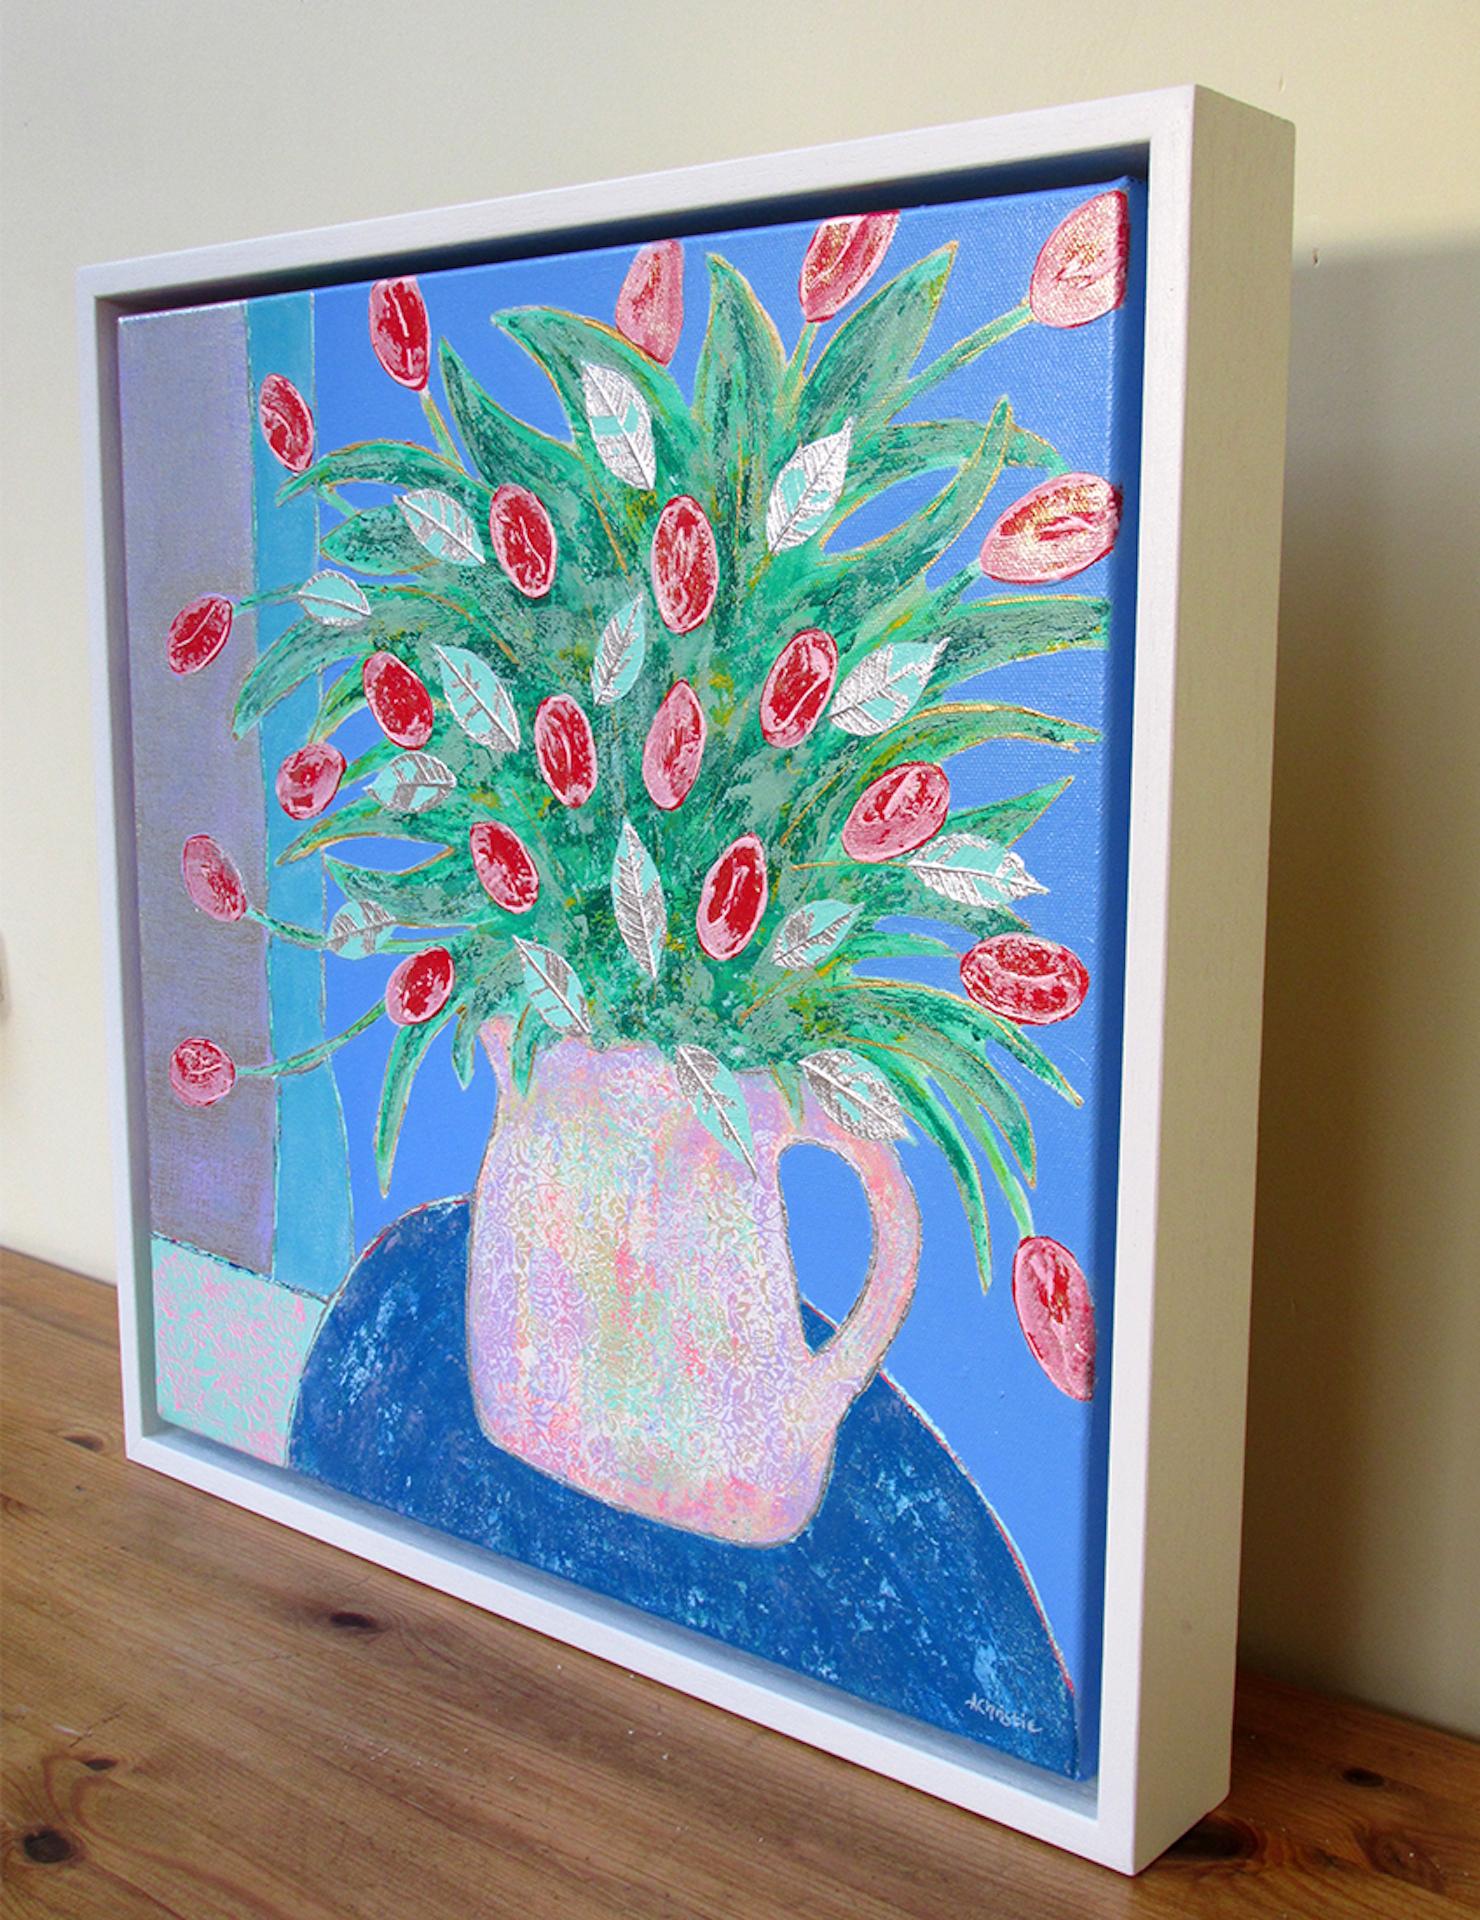 Tulips Against Blue Amy Christie, Affordable Bright Still Life Contemporary Art en vente 2